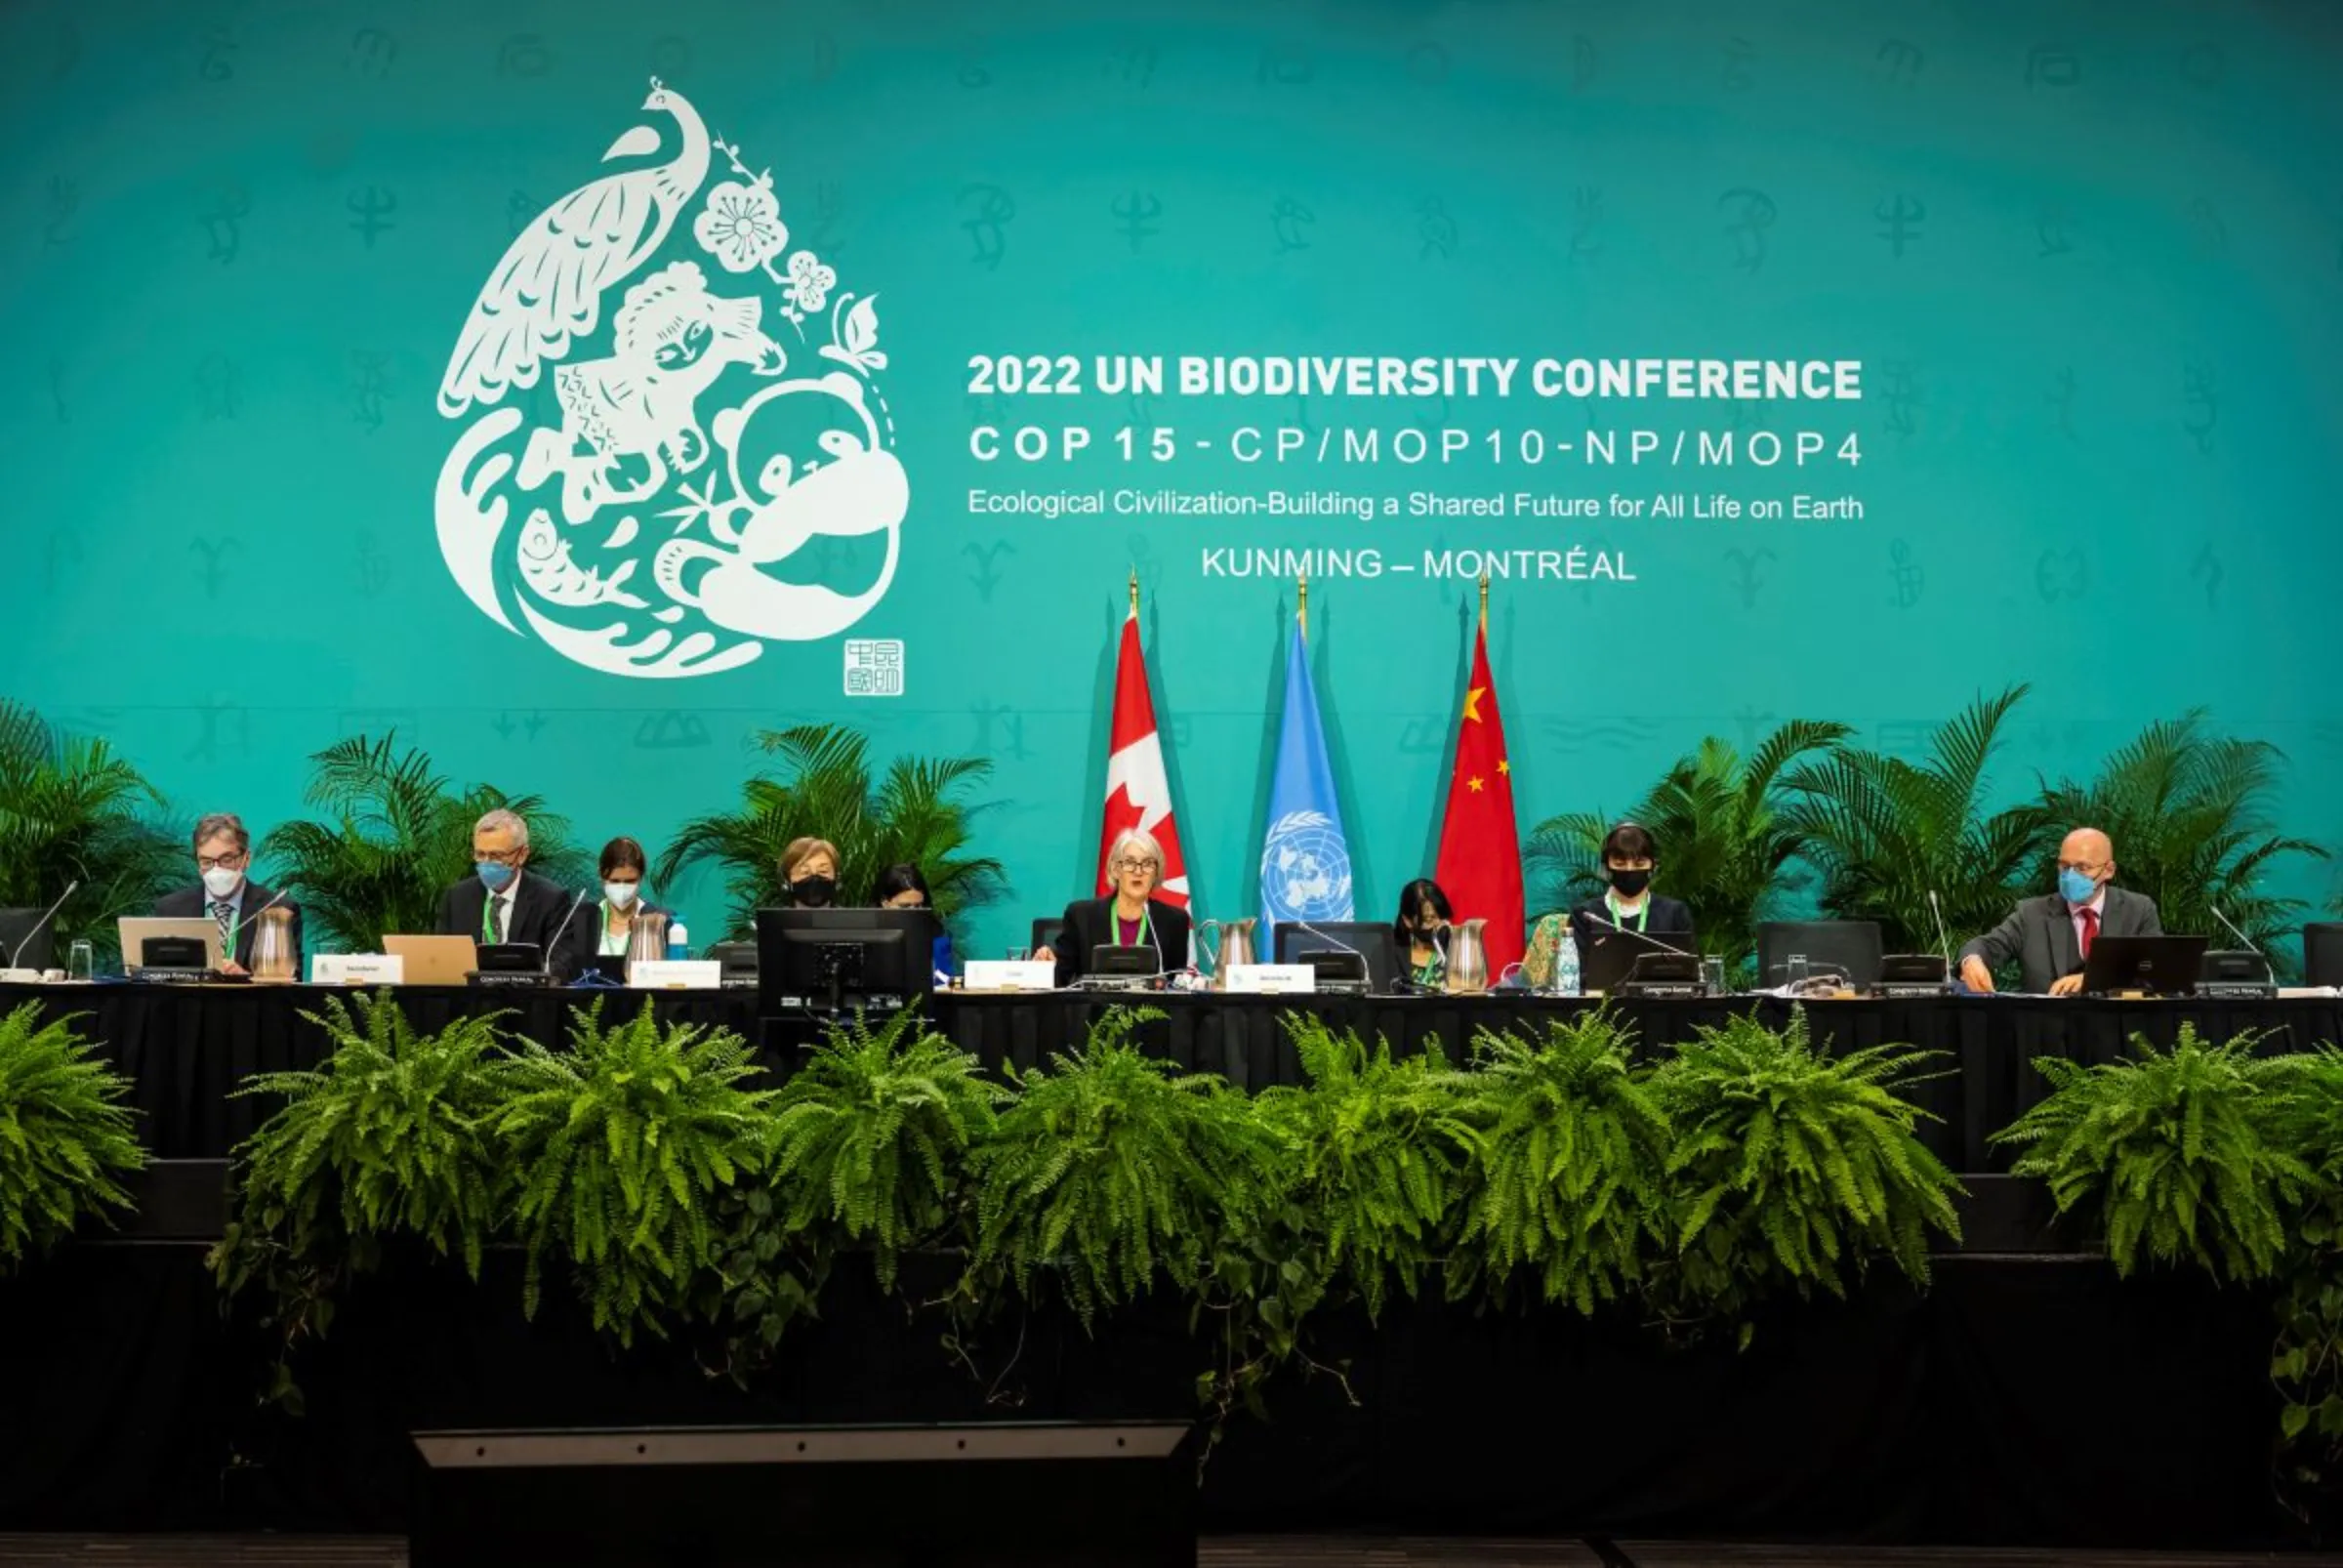 Officials speak during a panel at the COP15 summit on biodiversity in Montreal, Canada, 7 December 2022. UN Biodiversity/Handout via Thomson Reuters Foundation